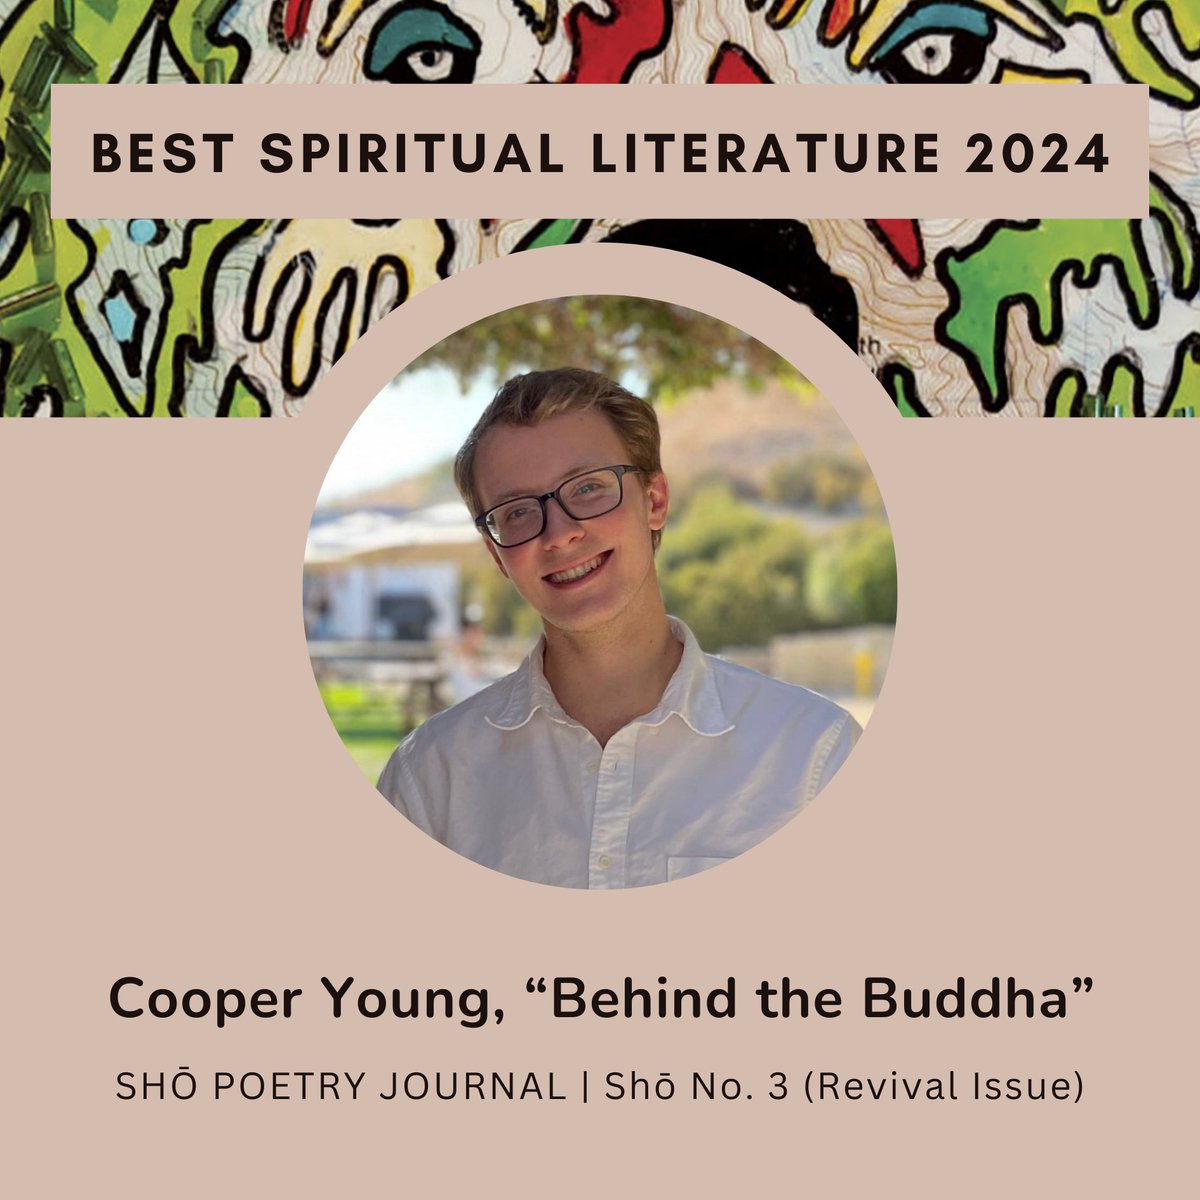 We are thrilled to announce that Cooper Young’s poem “Behind the Buddha,” which first appeared in our revival issue, has been chosen for the 2024 Best Spiritual Literature anthology (Vol. 9, @orisonbooks). Congratulations, Cooper! 👏